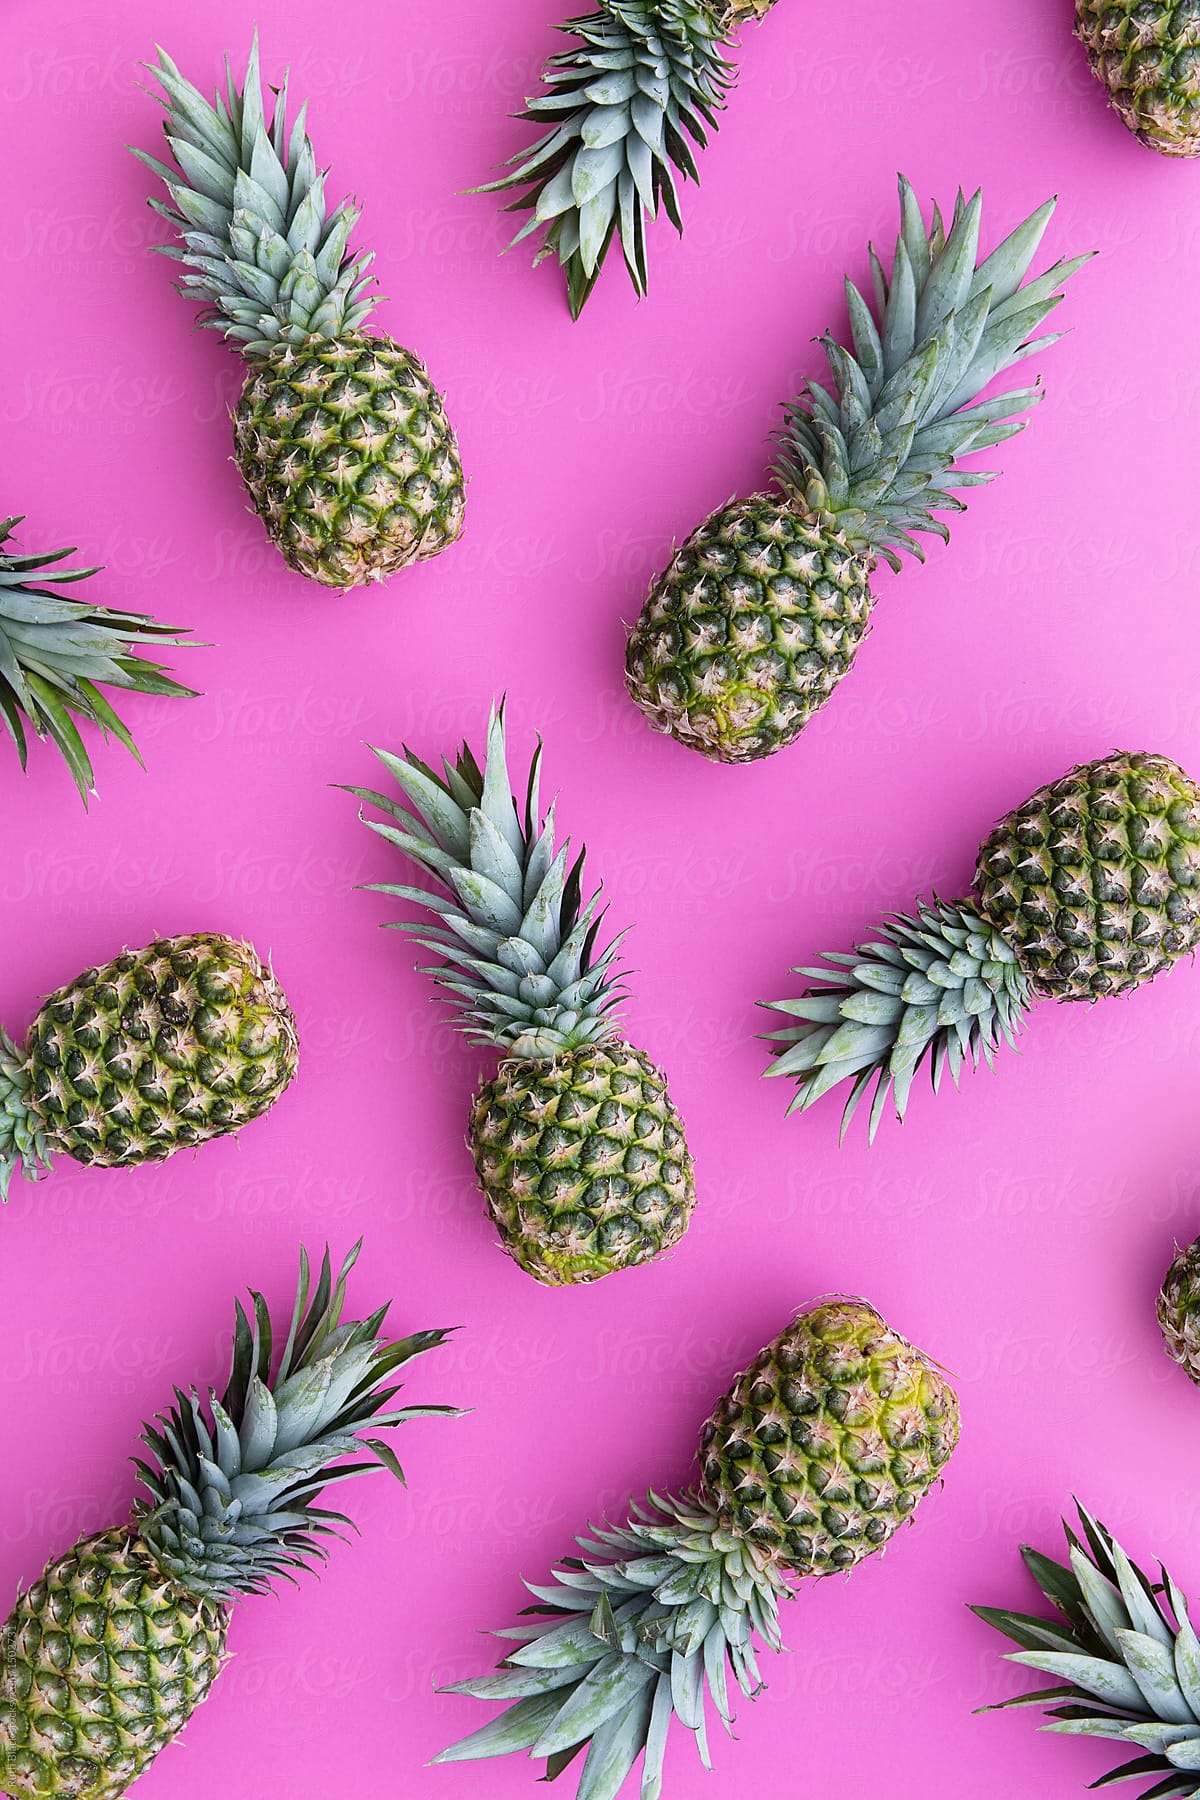 Pineapple Background Stocksy United 680076   PNG Images   PNGio